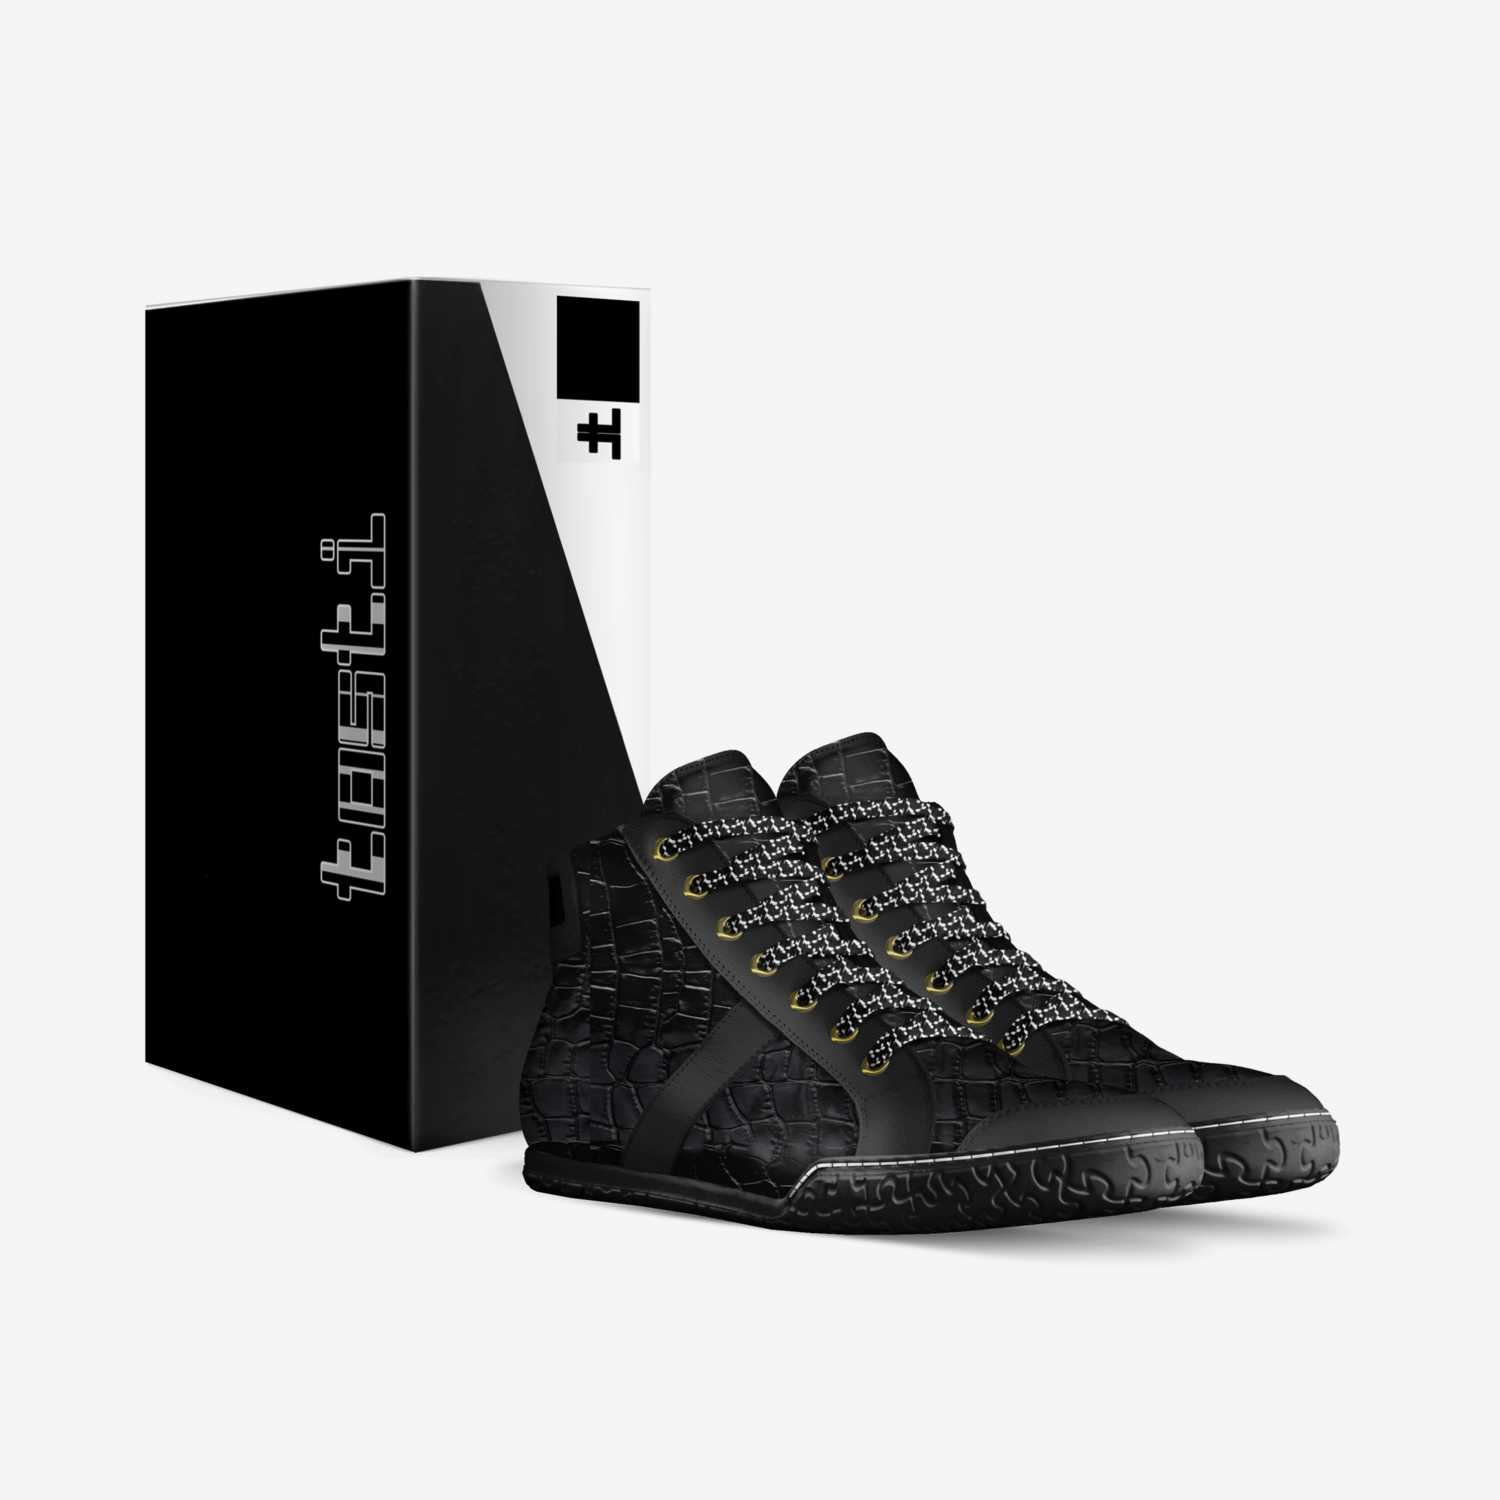 XIII custom made in Italy shoes by James Tosti | Box view